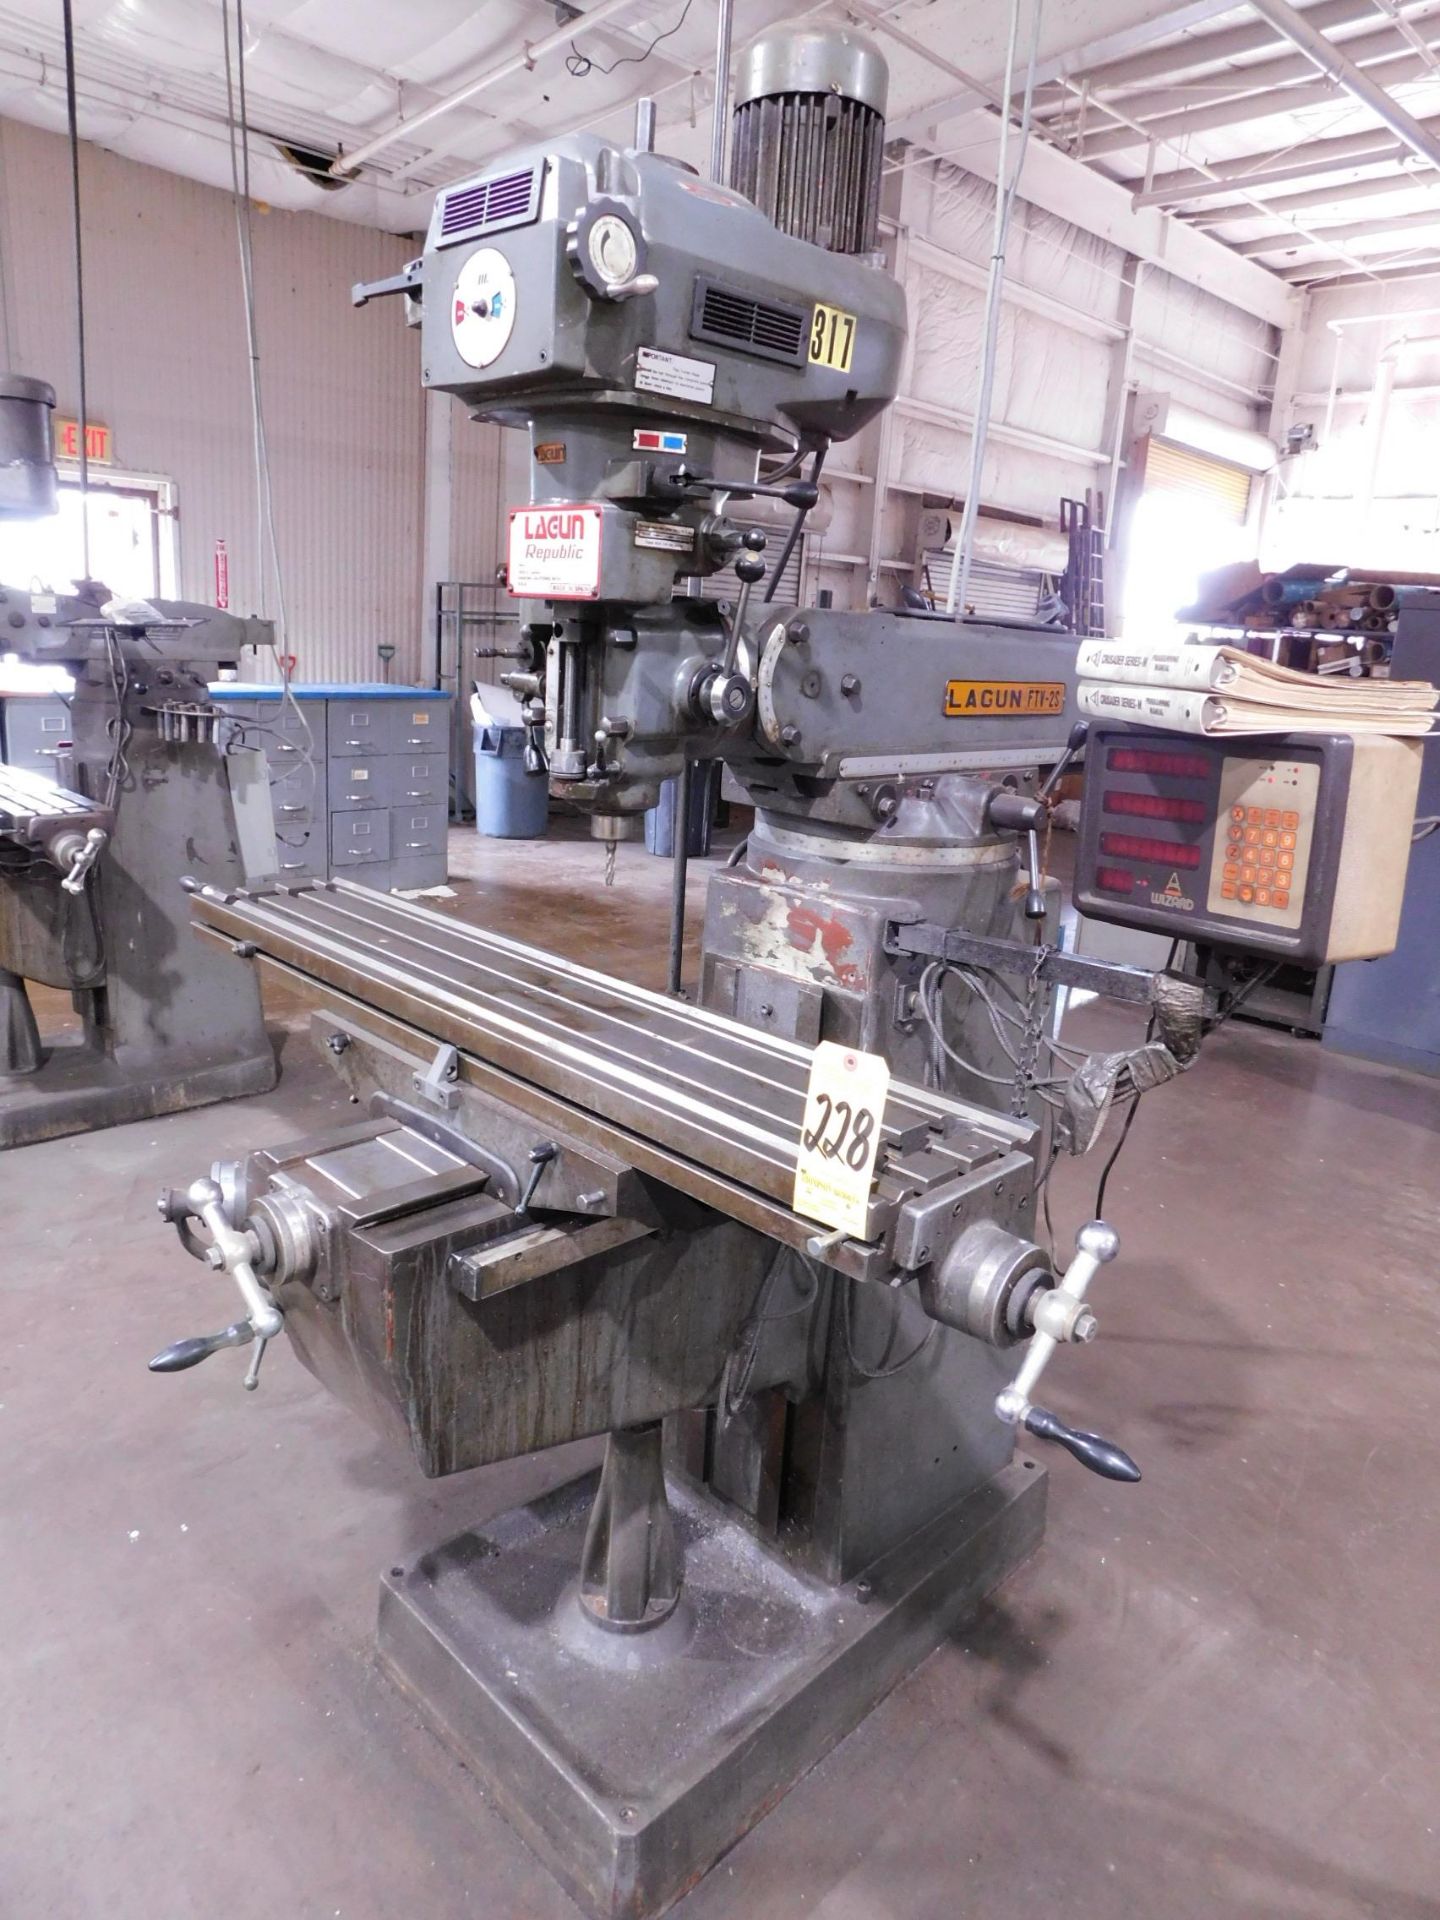 Lagun Model FTV-2S Variable Speed Vertical Mill, s/n 2E-21463, 10" X 50" Table, Anilam Wizard D.R. - Image 2 of 7